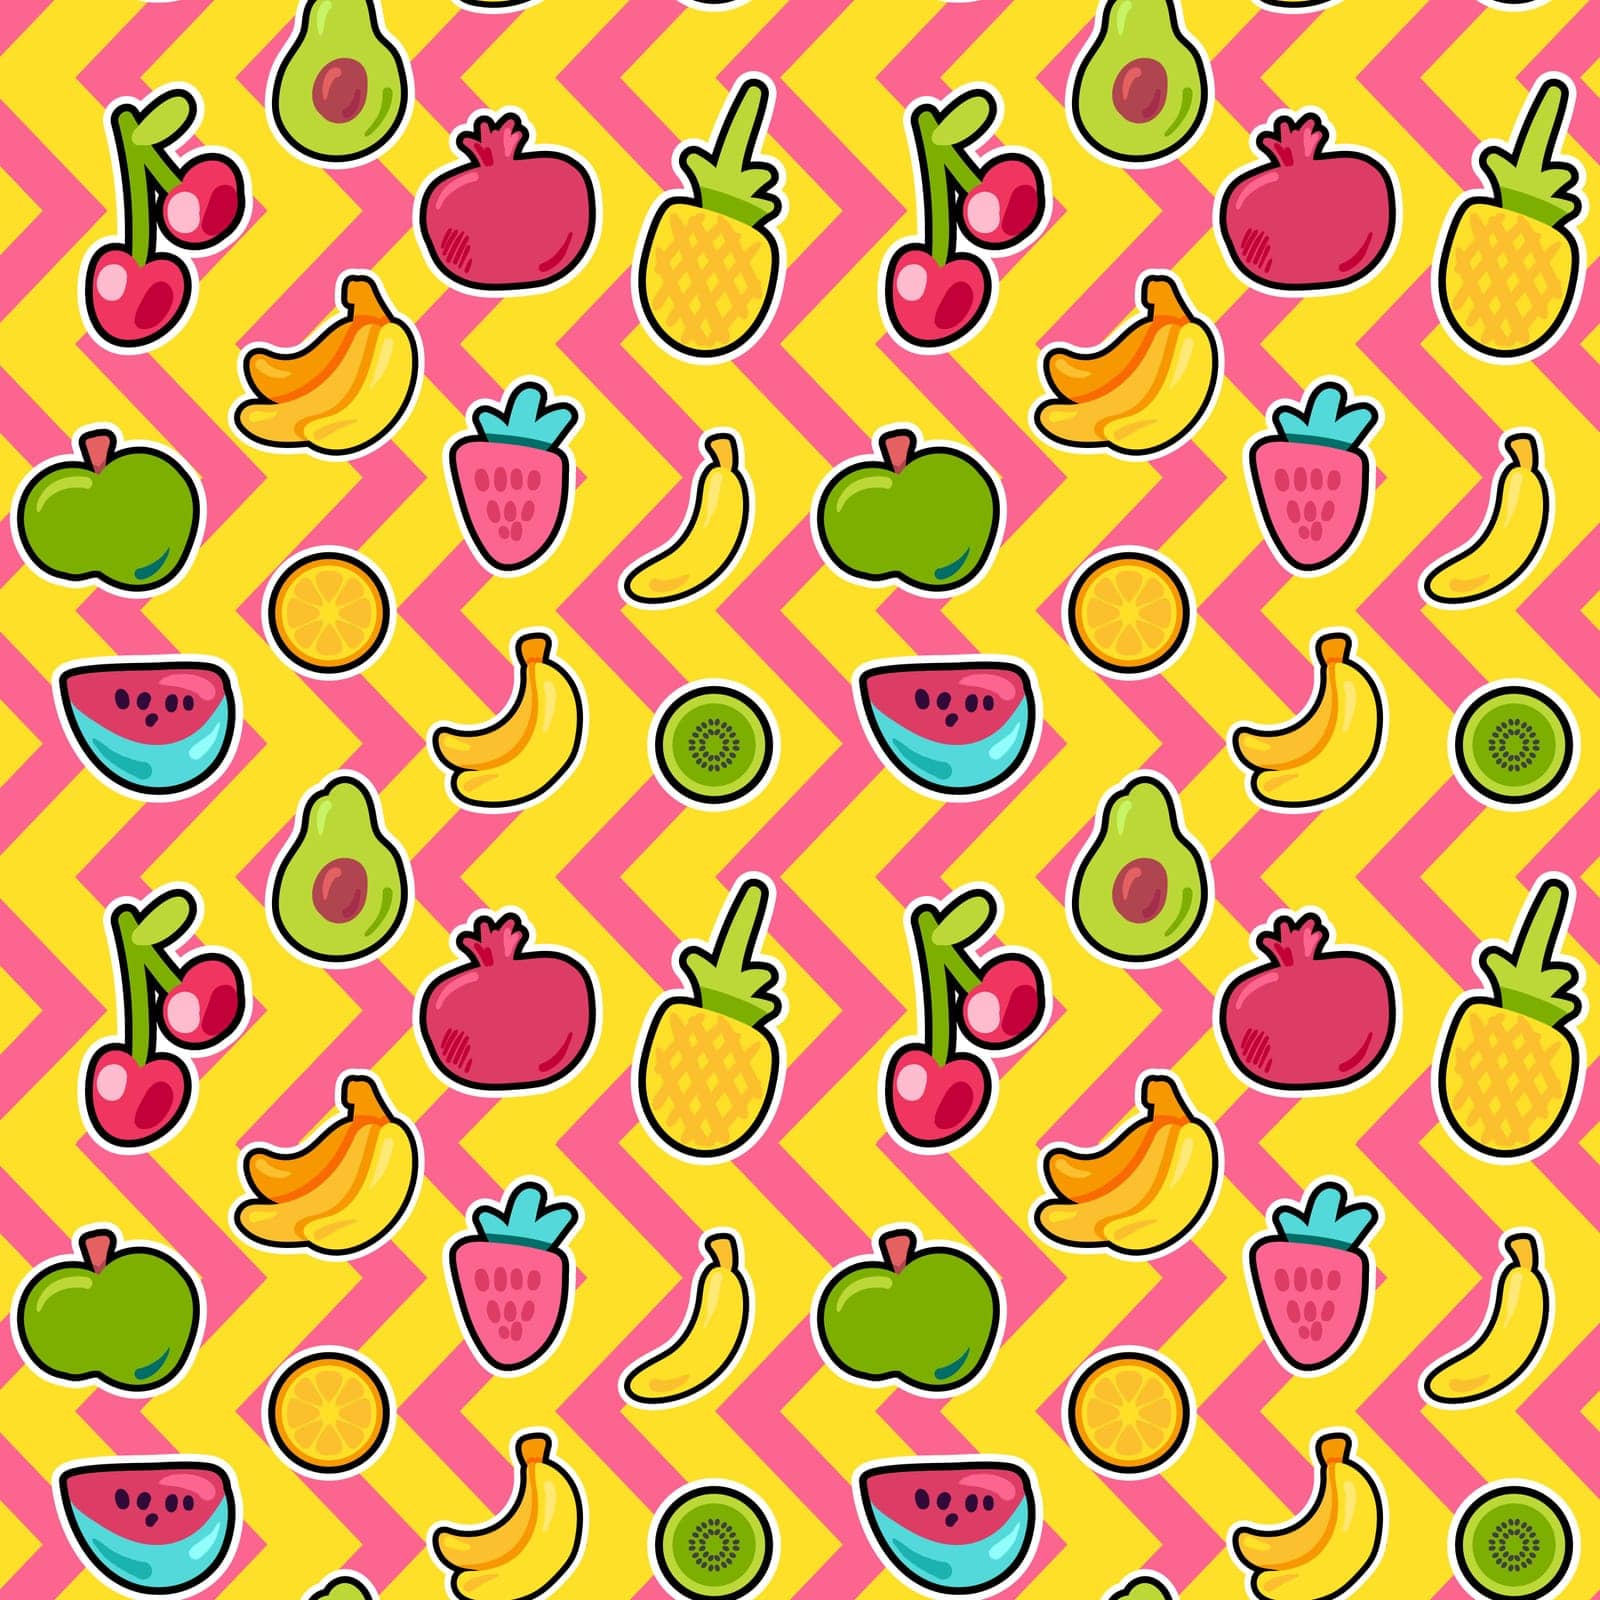 Tropical fruits, berries vector seamless pattern. Outlined exotic sliced fruits wallpaper design